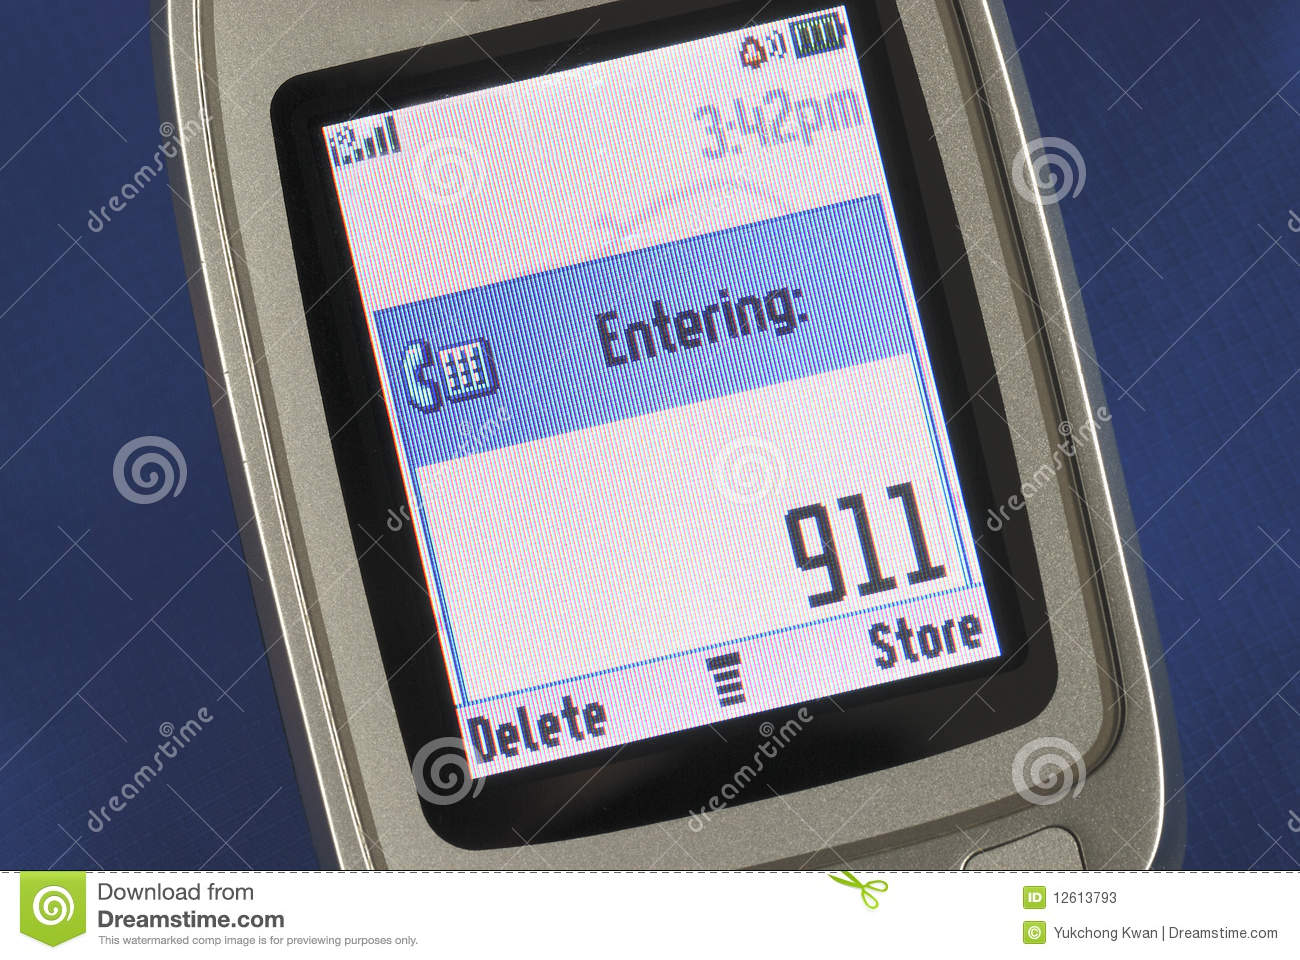 Emergency Number 911 Displayed On A Cell Phone Stock Photos   Image    